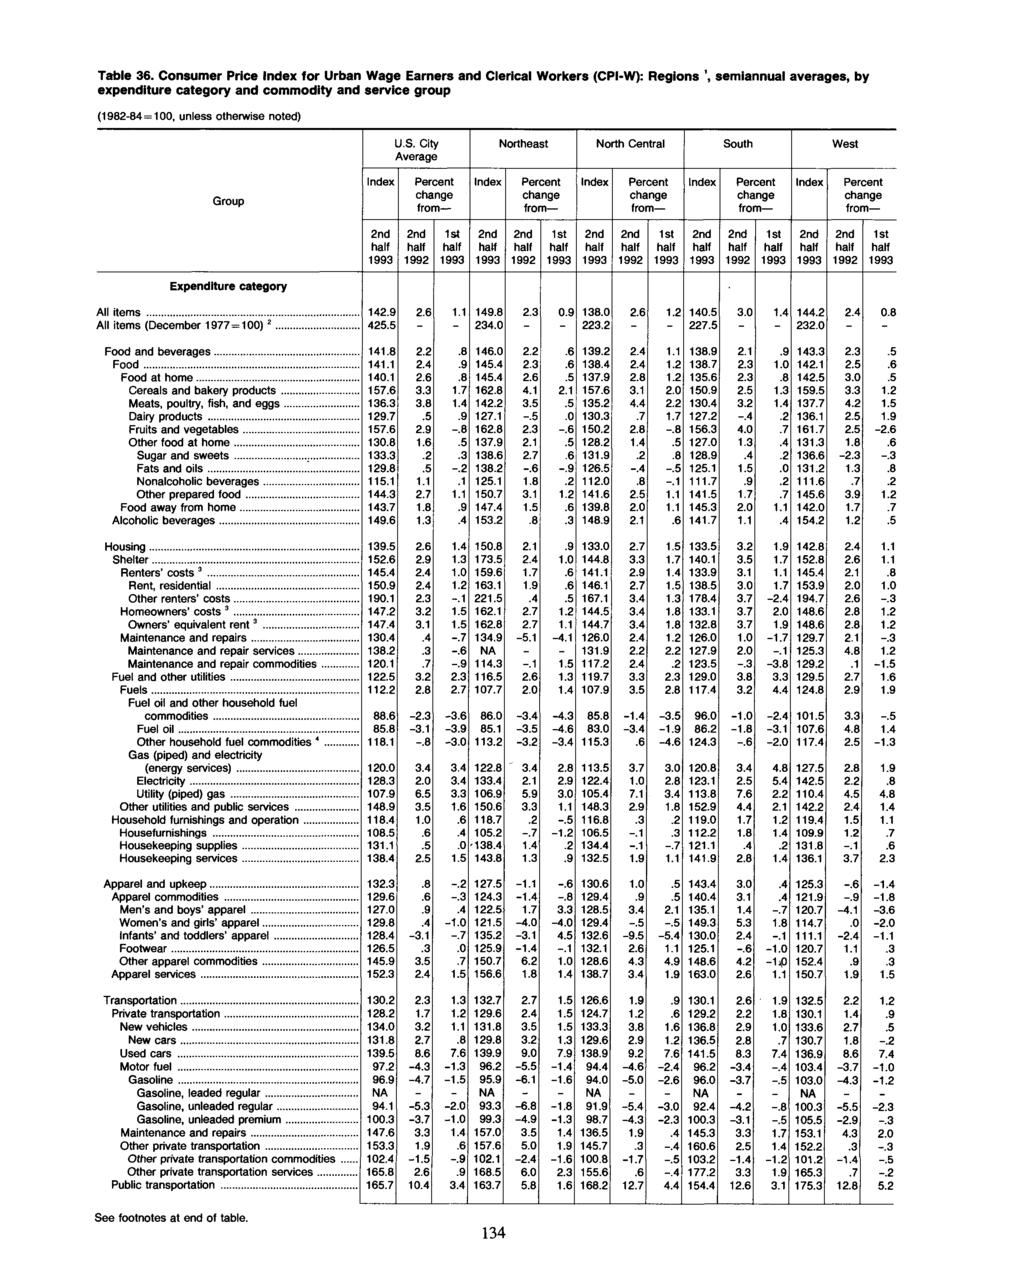 Table 36. Consumer Price for Urban Wage Earners and Clerical Workers (CPI-W): Regions 1, semiannual s, by expenditure category and commodity and service group U.S.